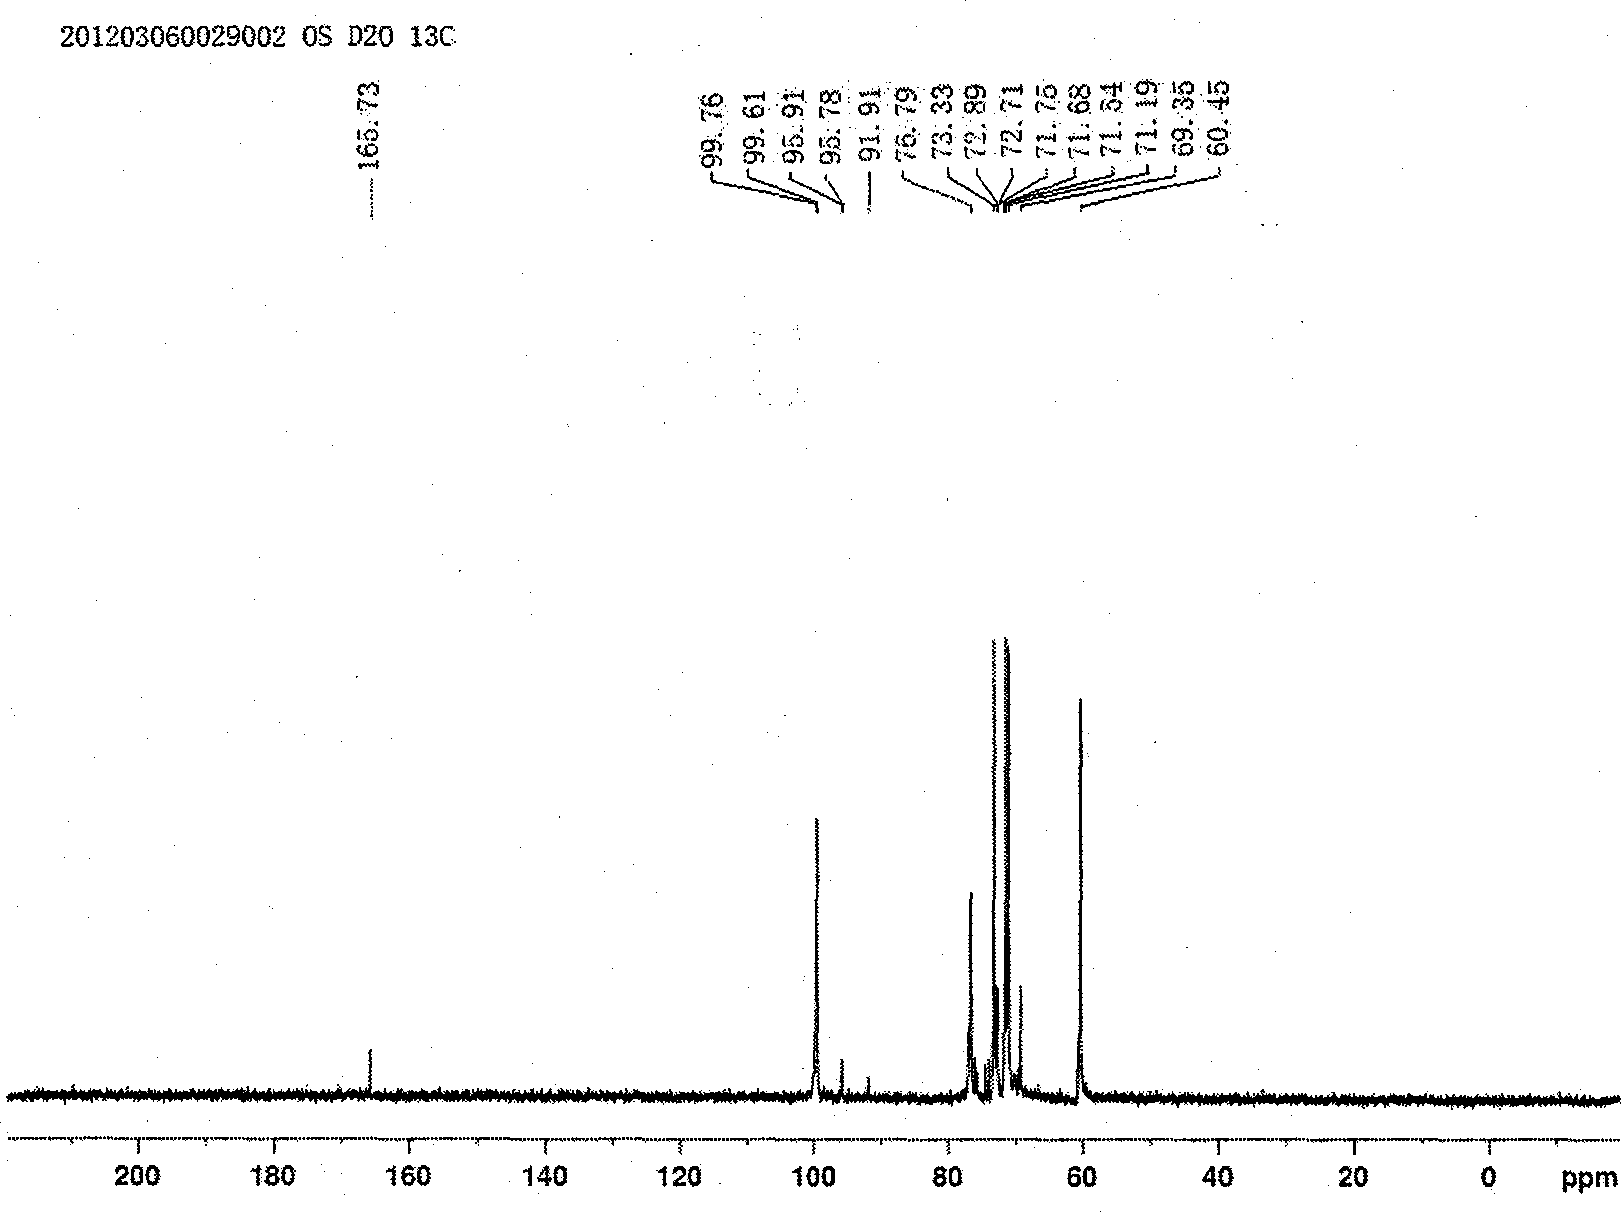 Carbonyl starch oxidized by Fenton similar system, and preparation method of carbonyl starch